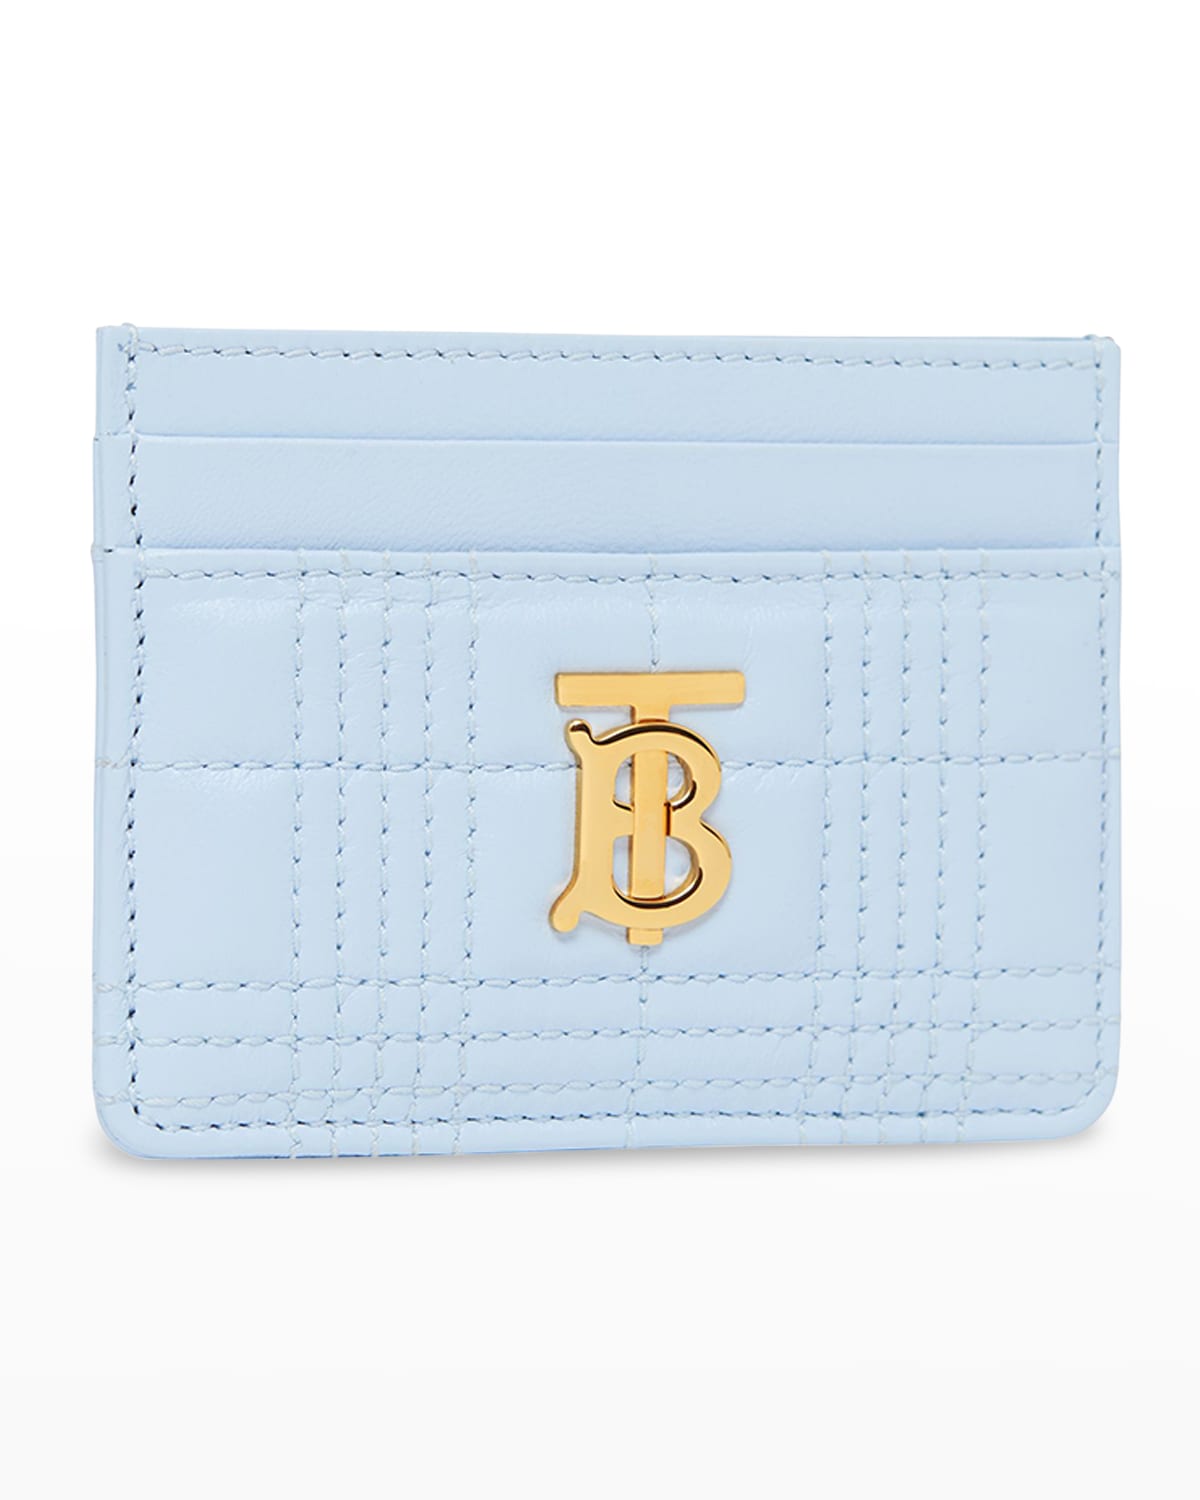 Burberry Lola TB Quilted Leather Card Case